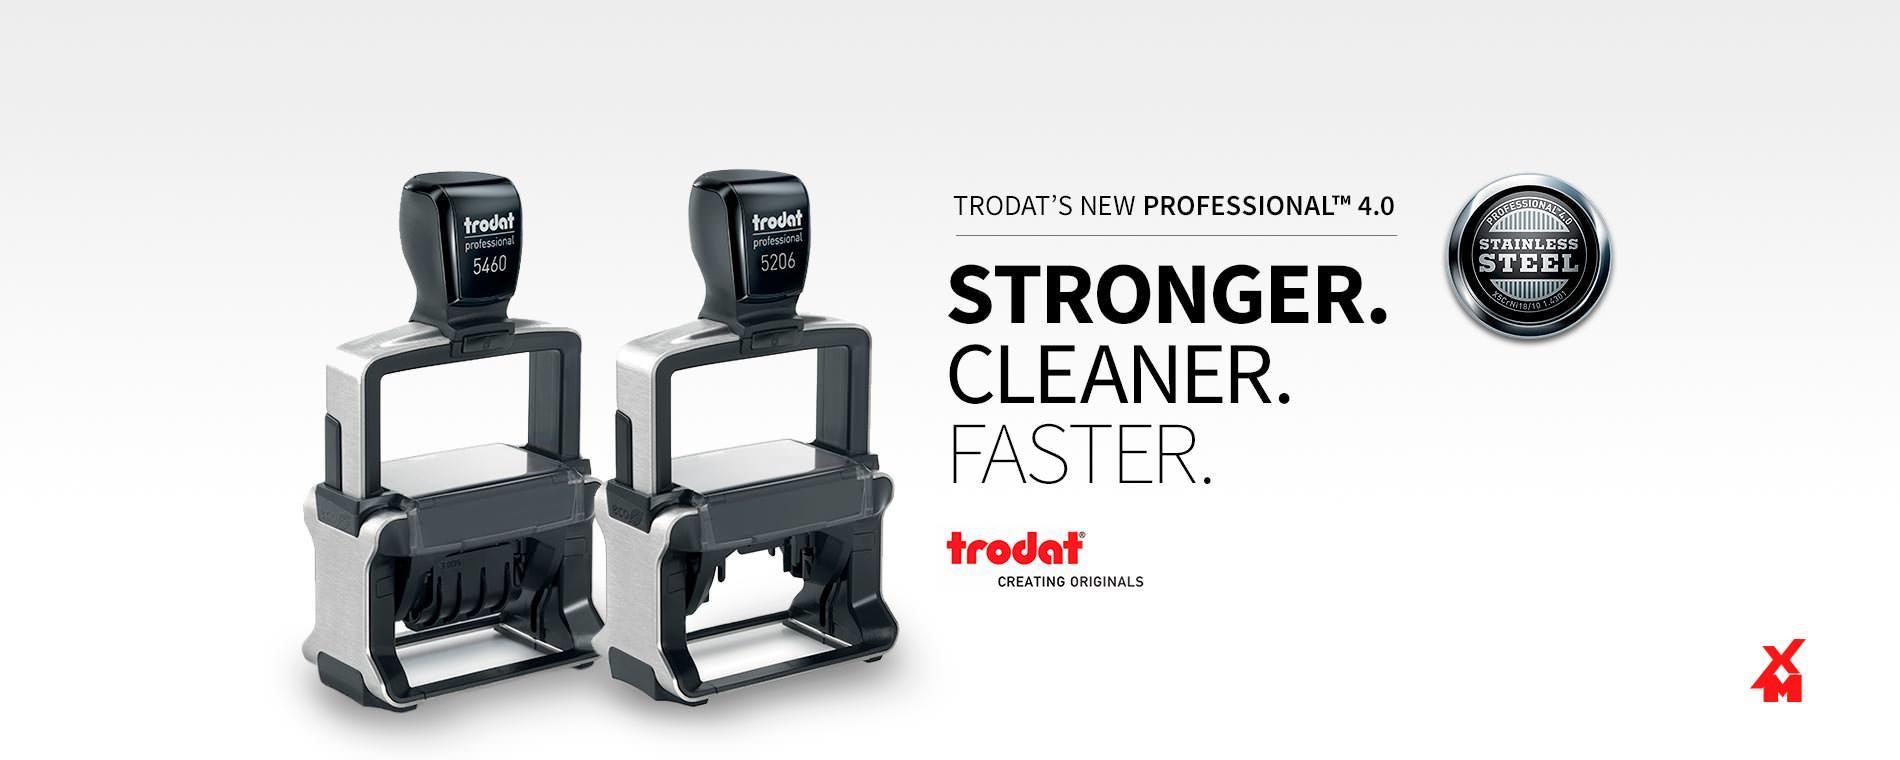 Trodat Logo - Buy Rubber Stamps Online - Xpress Marking South Africa